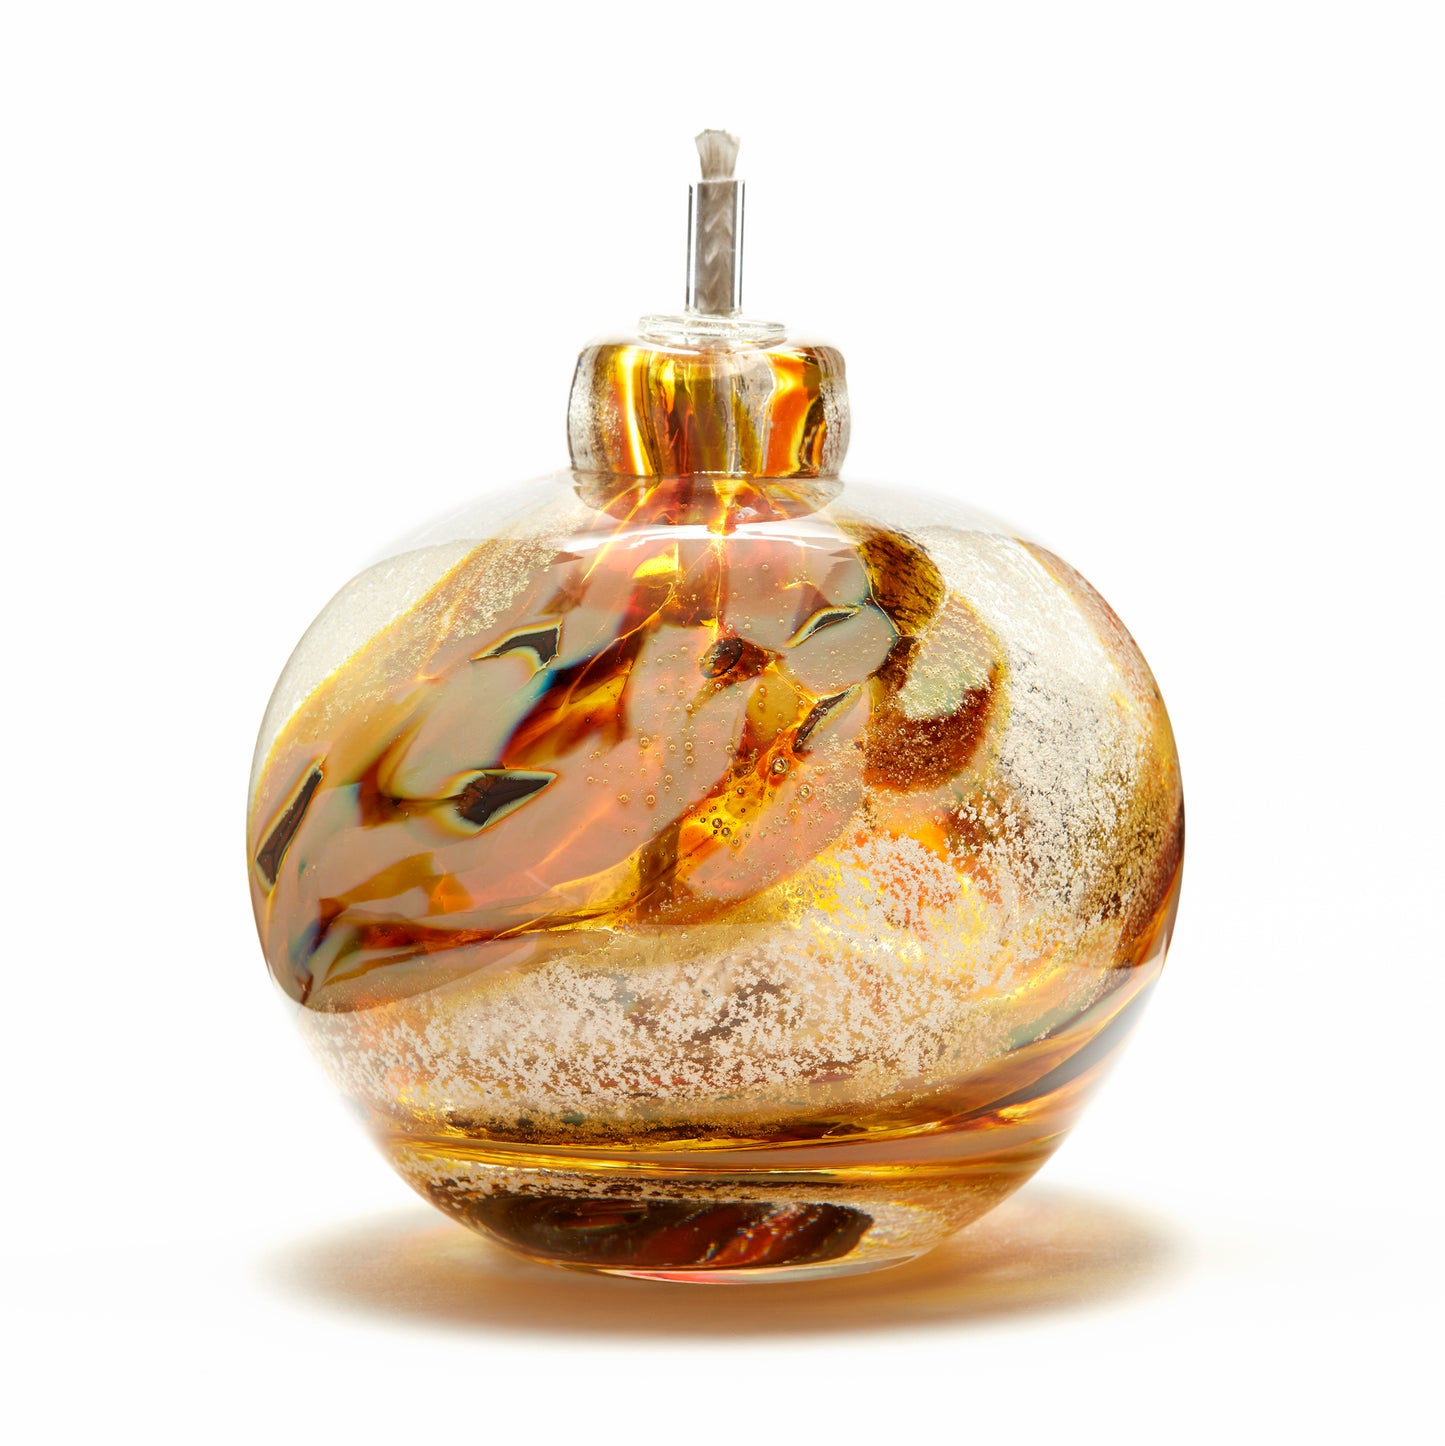 Round memorial glass art eternal flame oil lamp with cremation ash. Iris gold glass.